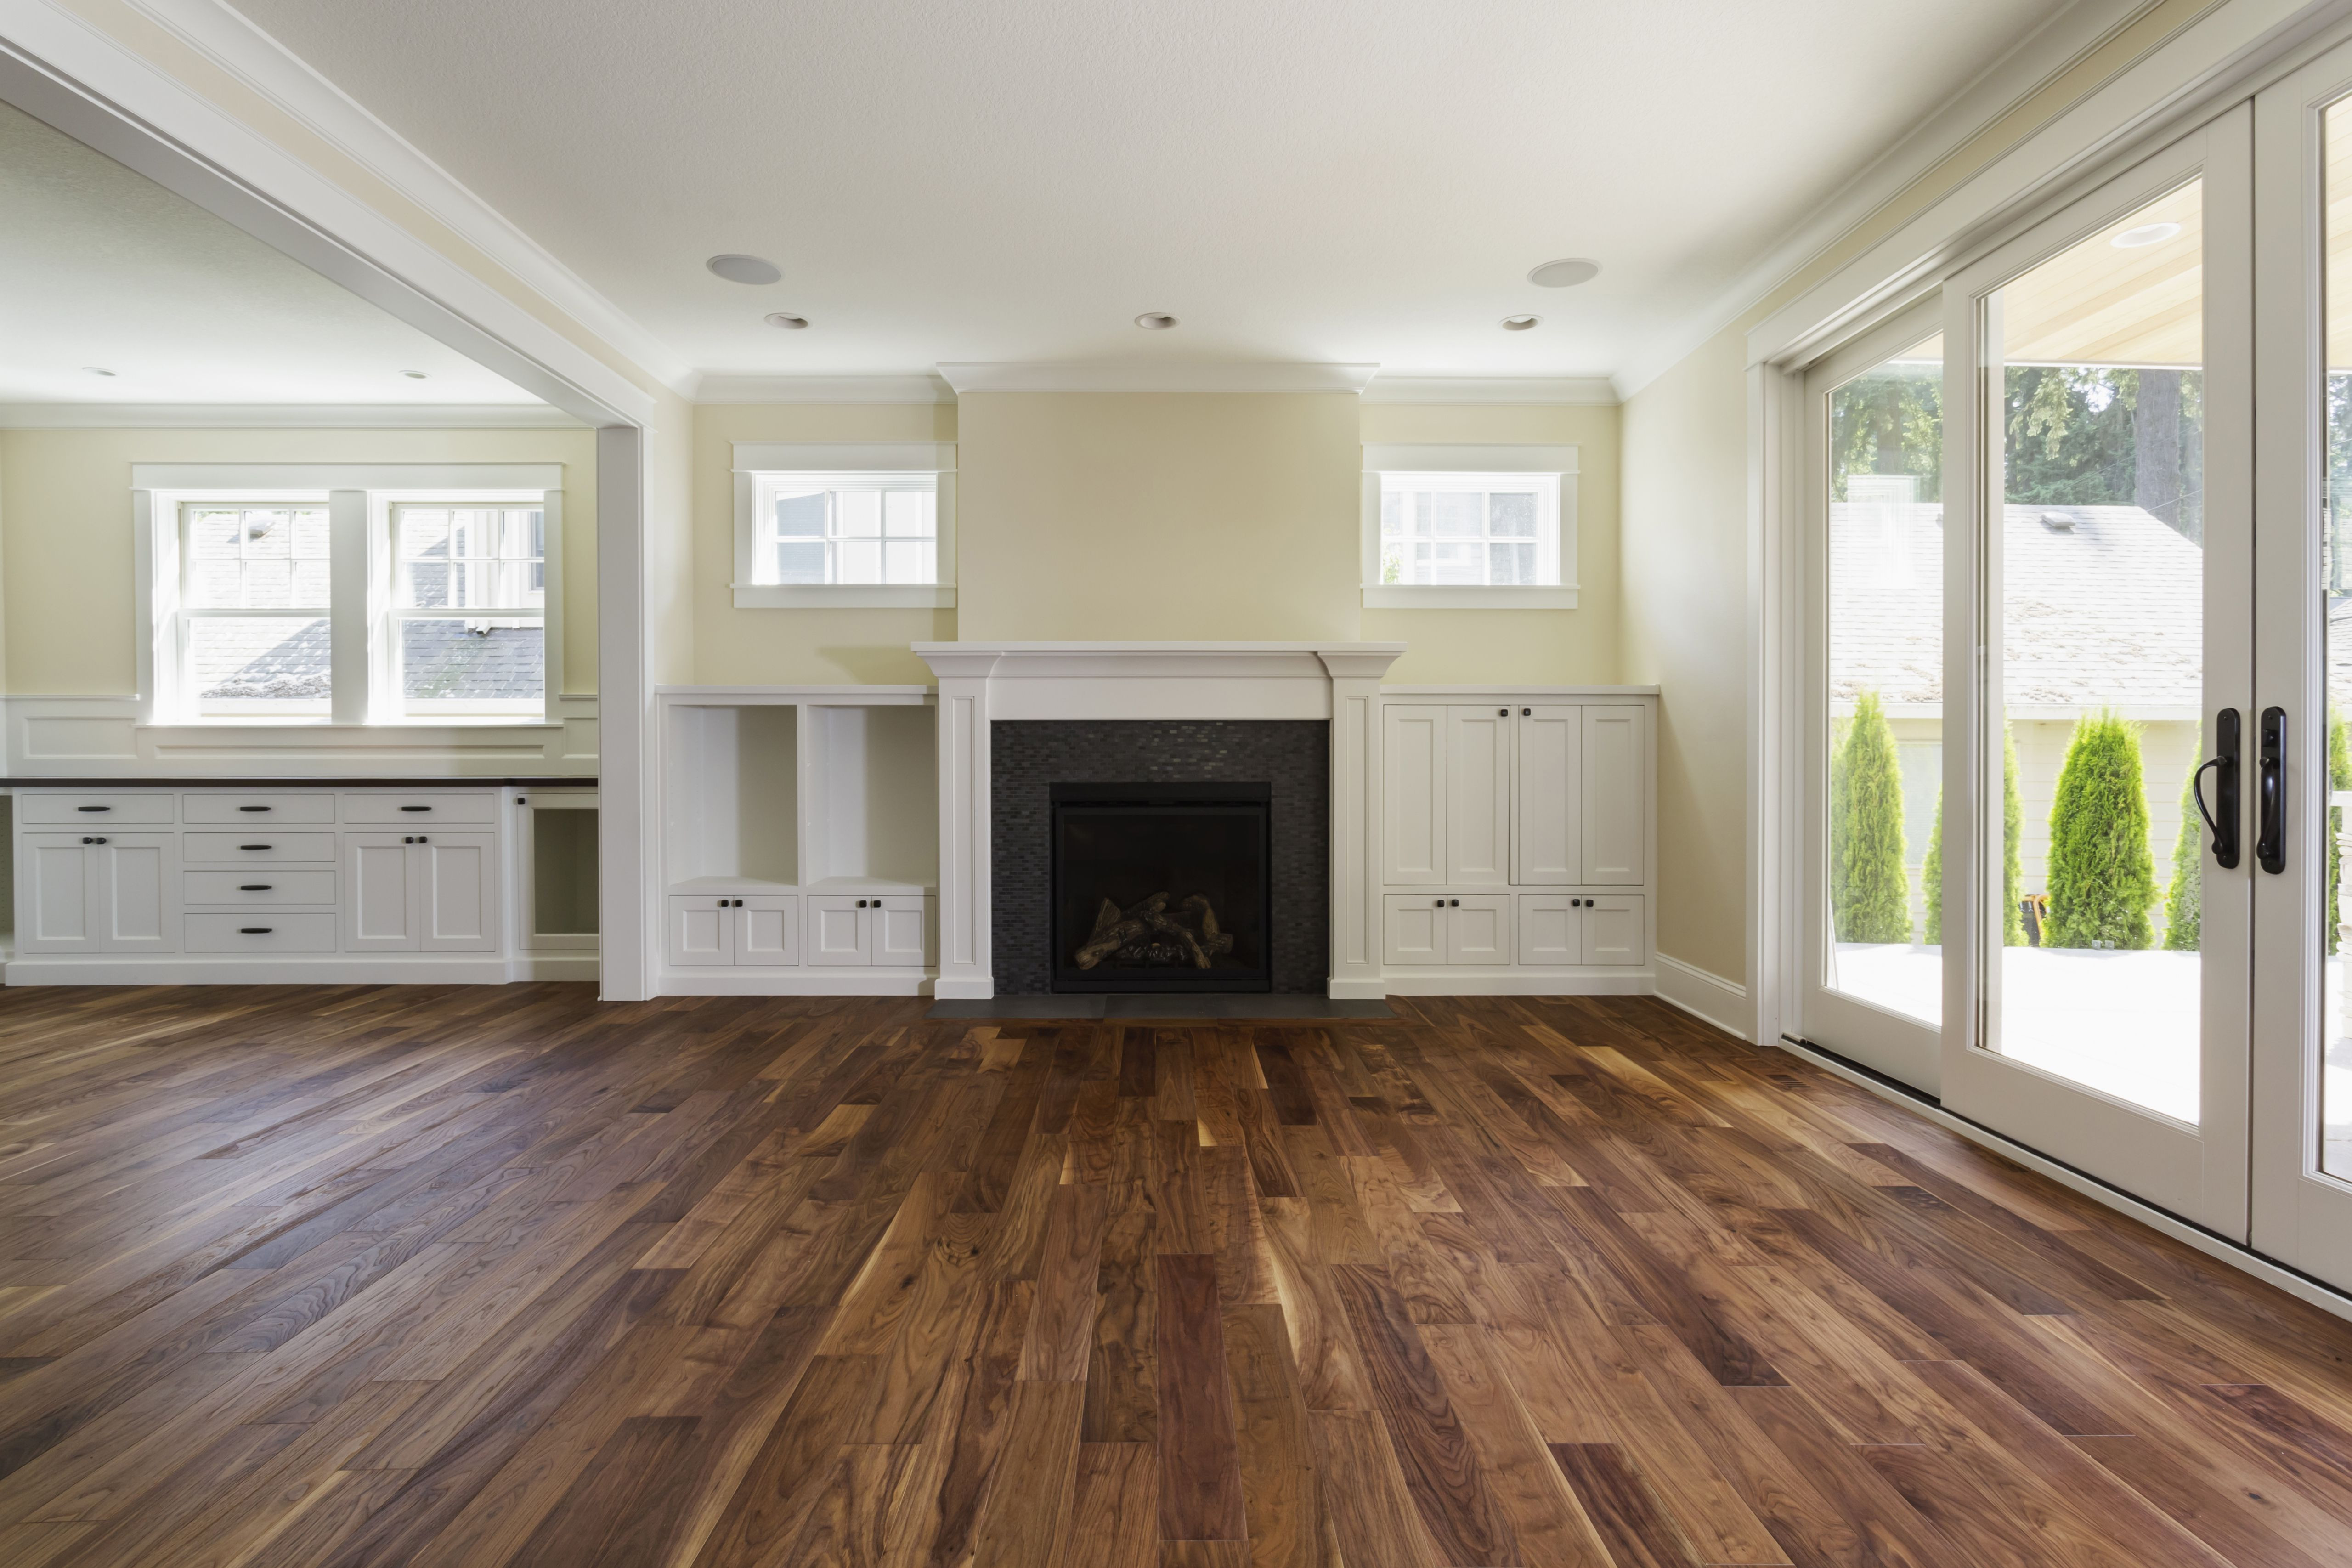 25 Cute Do It Yourself Sanding Hardwood Floors 2024 free download do it yourself sanding hardwood floors of the pros and cons of prefinished hardwood flooring within fireplace and built in shelves in living room 482143011 57bef8e33df78cc16e035397